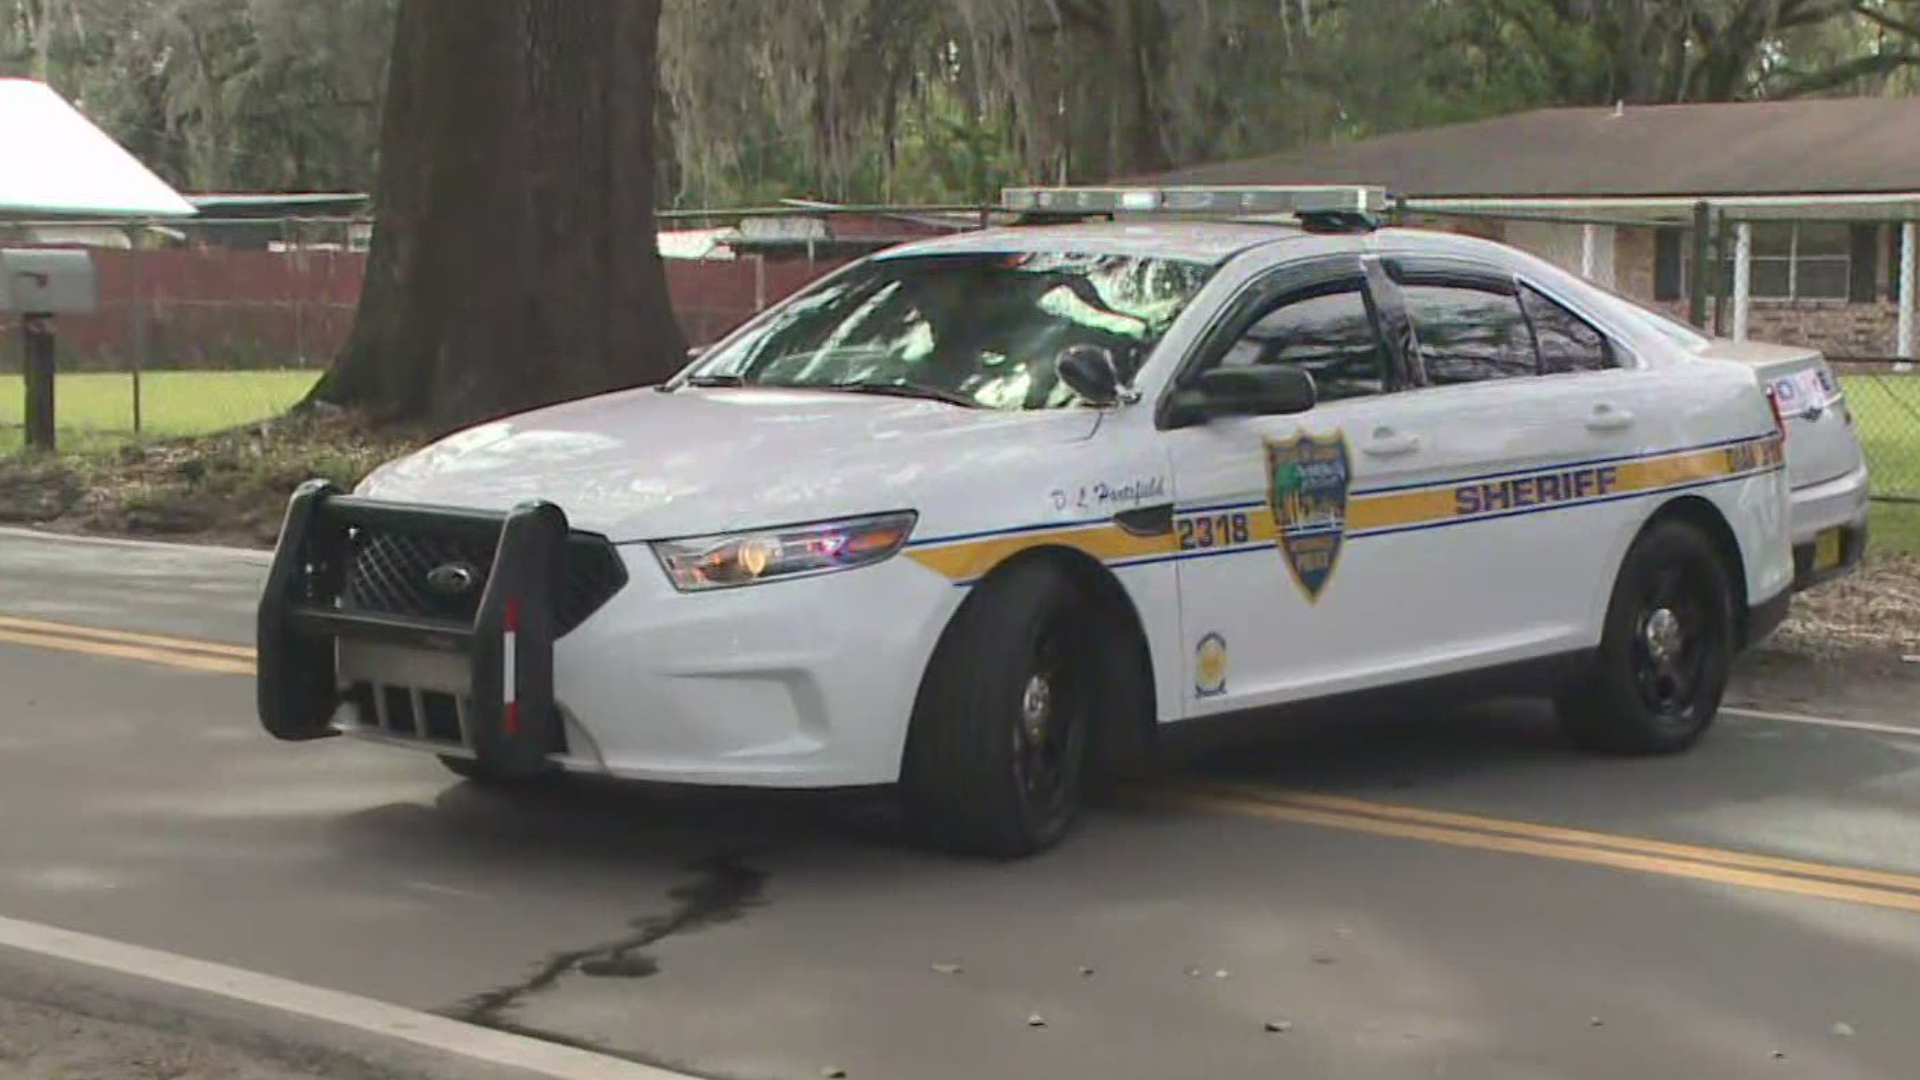 The shooting happened on West 22nd Street in the Brentwood area, but police moved the investigation to a wooded area off Old Kings Road in West Jacksonville.